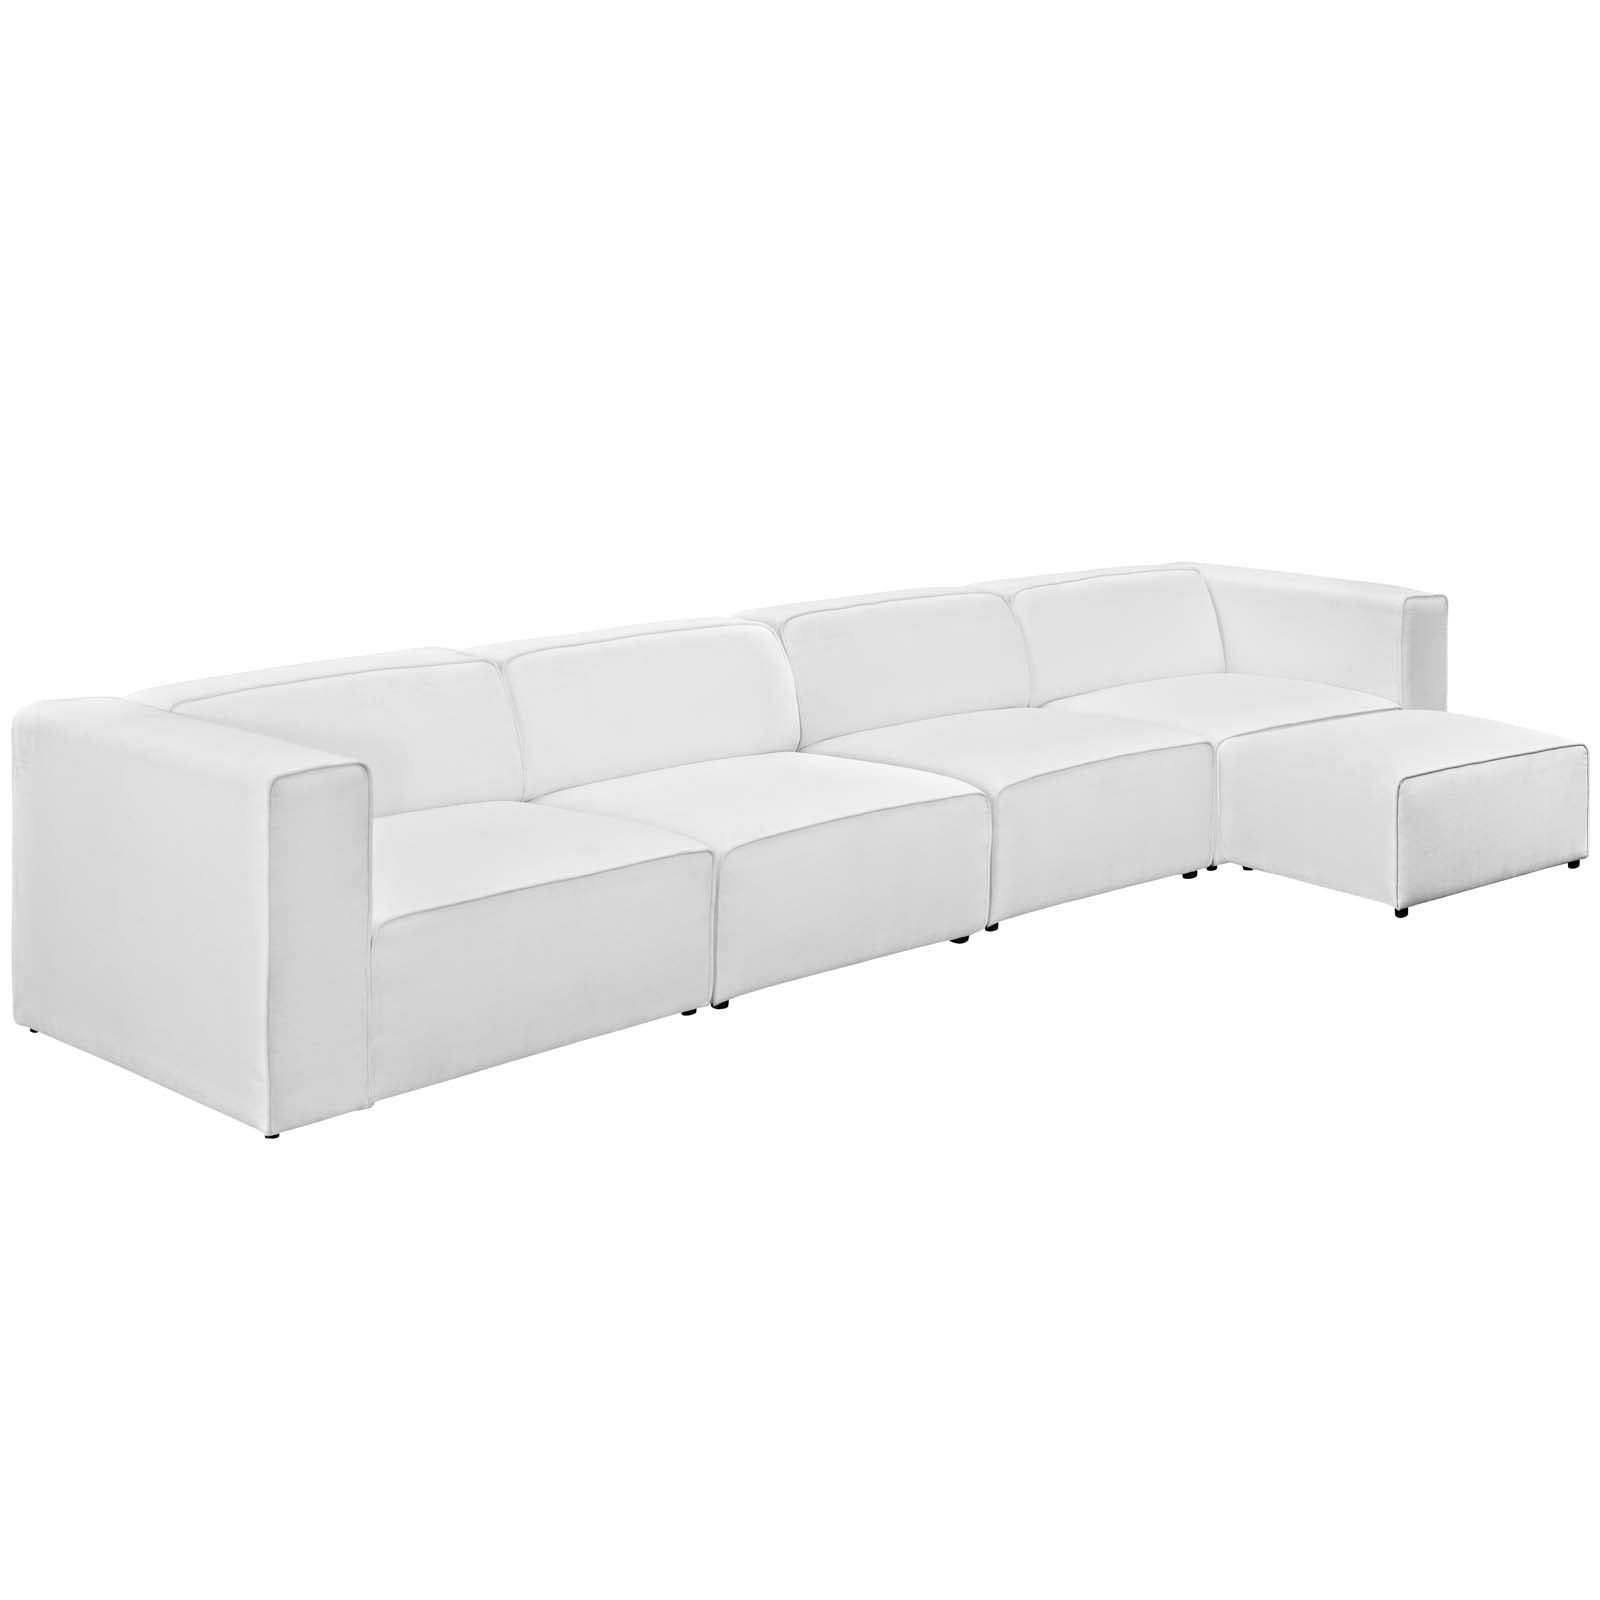 Modway Sectional Sofas - Mingle 5 Piece Upholstered Fabric Sectional Sofa Set White